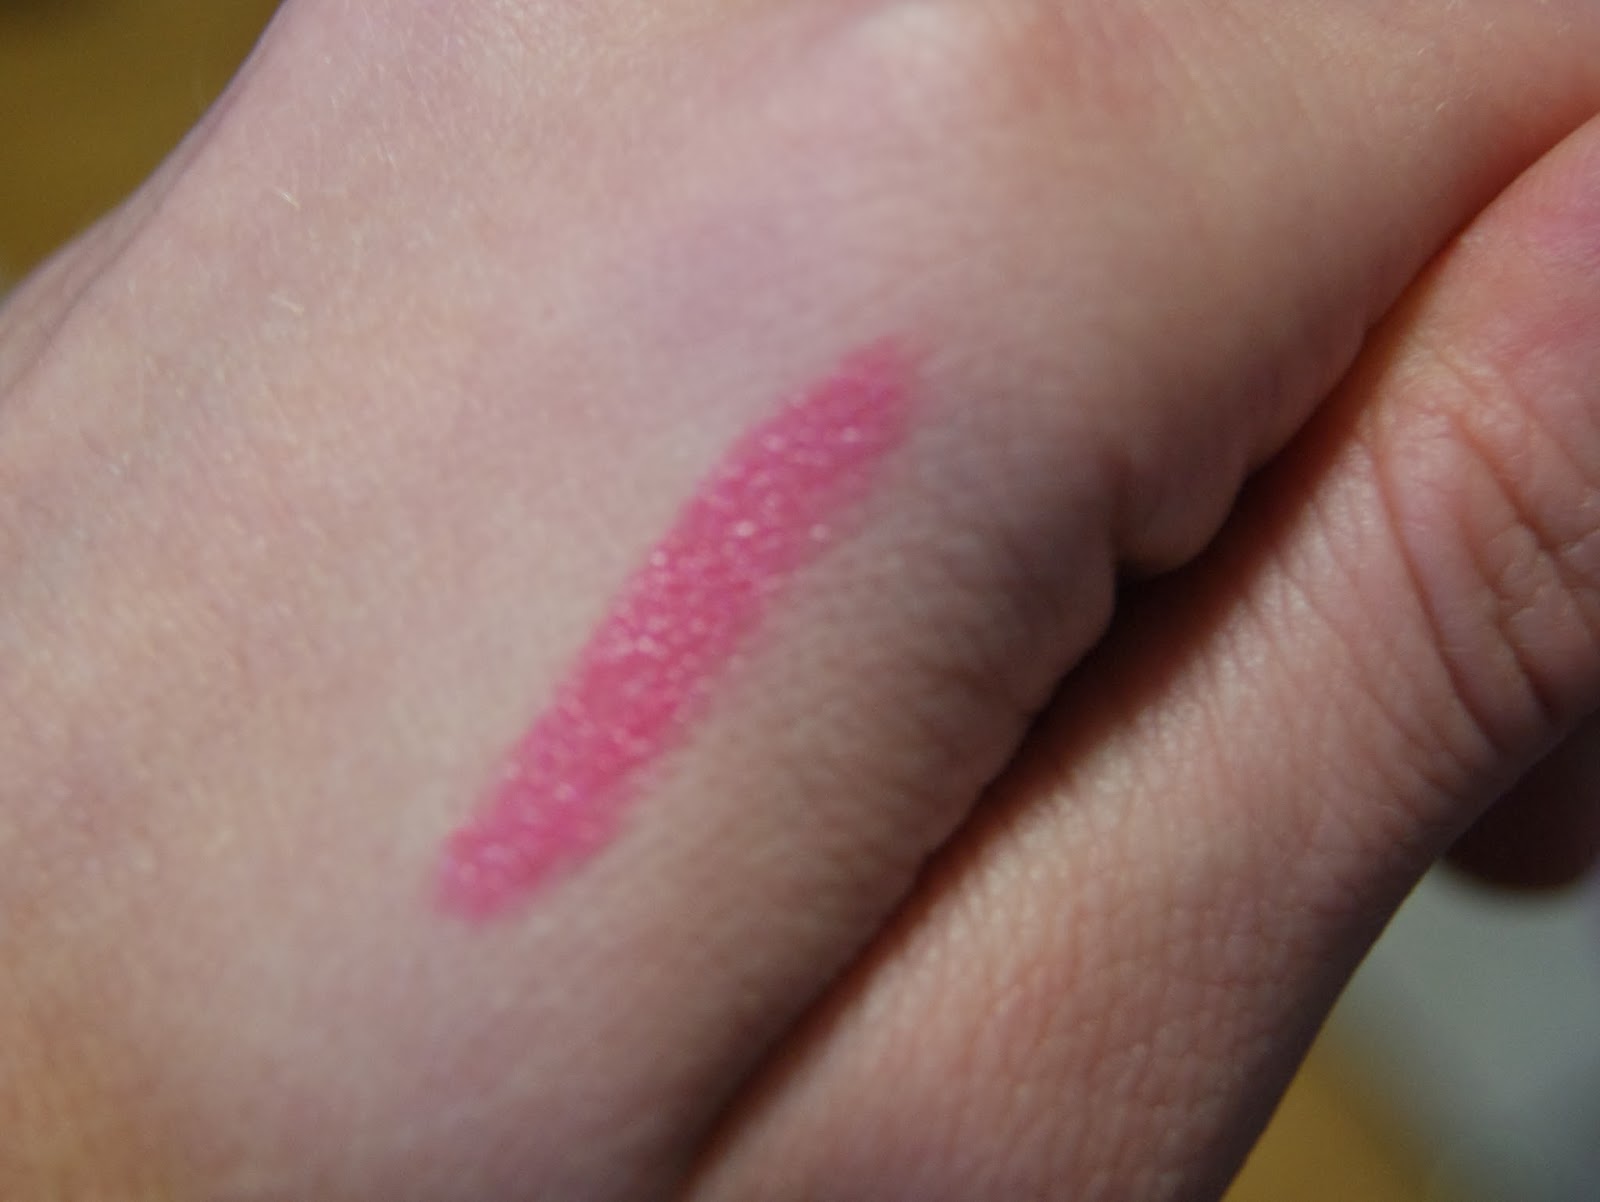 Covergirl Lip Perfection Jumbo Gloss Balm in Watermelon Twist Beauty Makeup Fashion Blogger from Toronto Canada Review